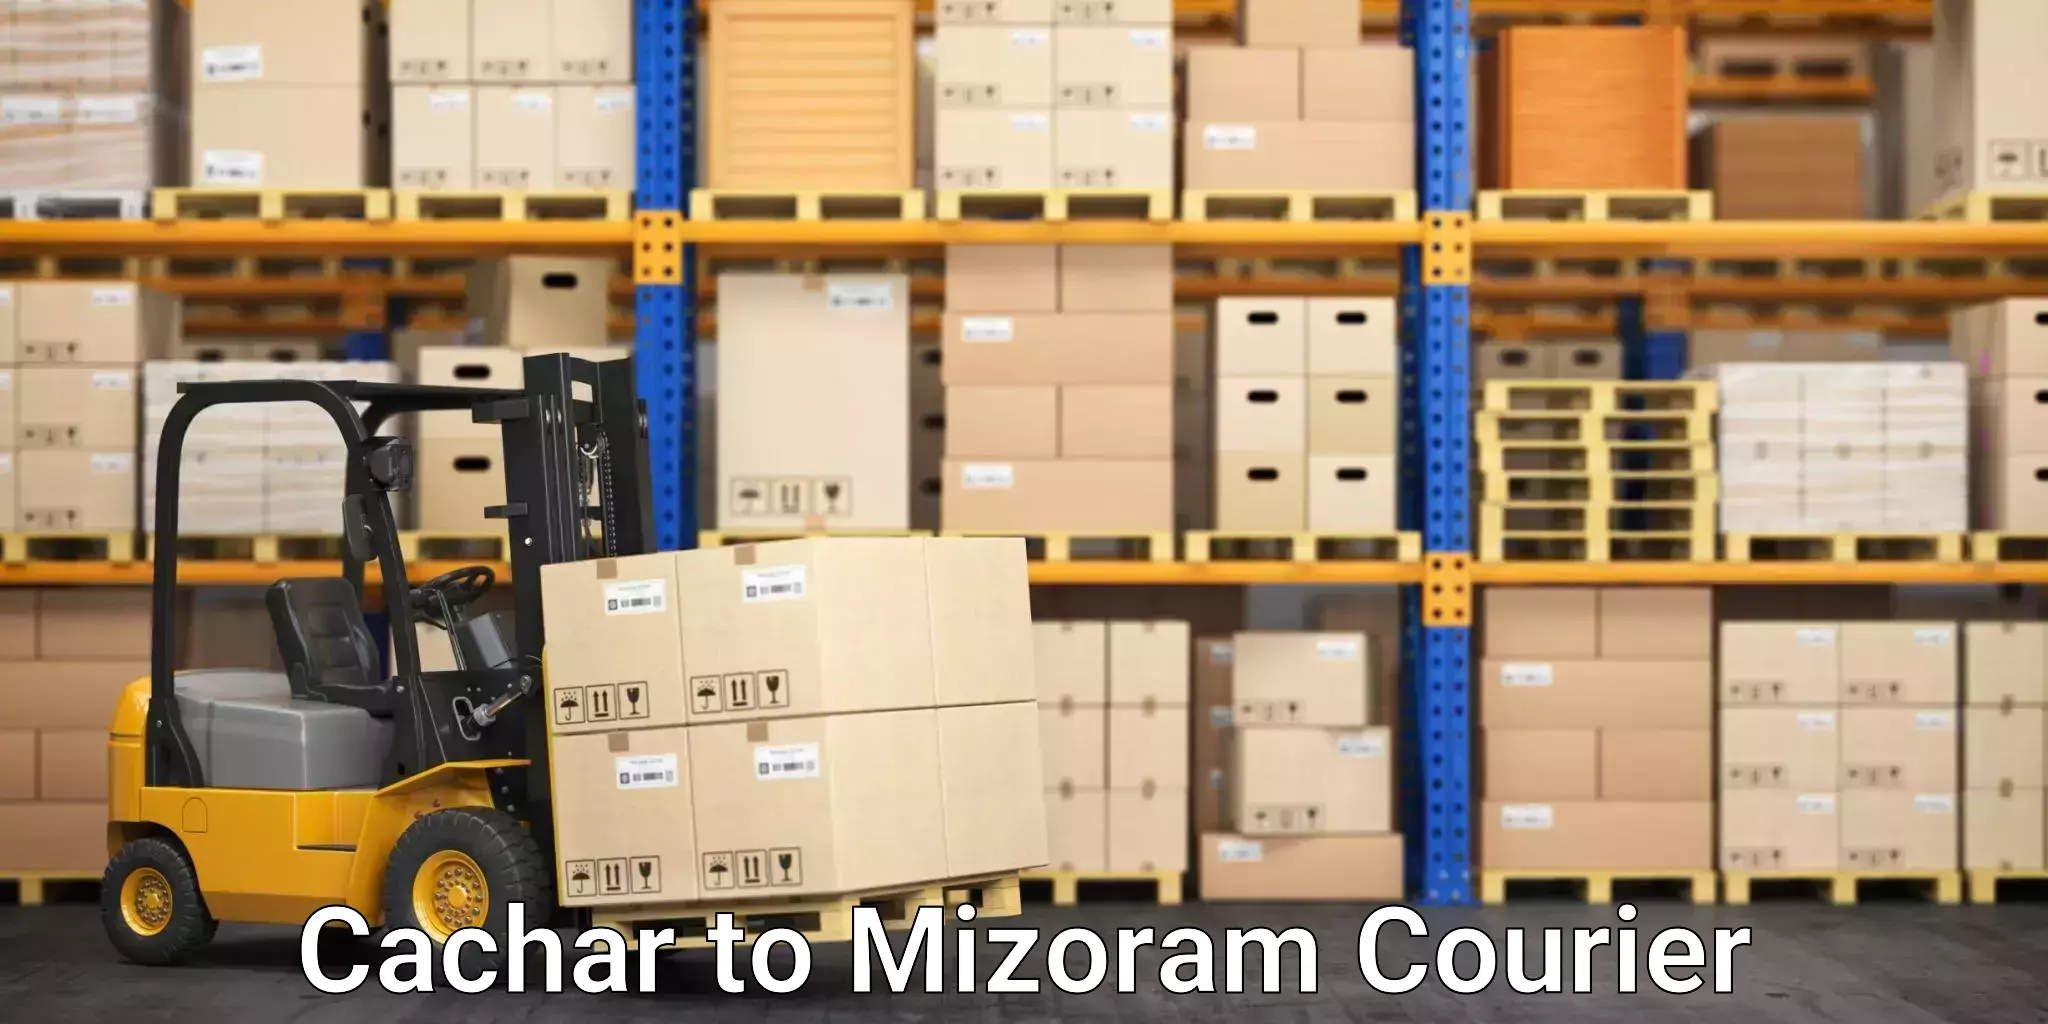 Advanced parcel tracking in Cachar to Mizoram